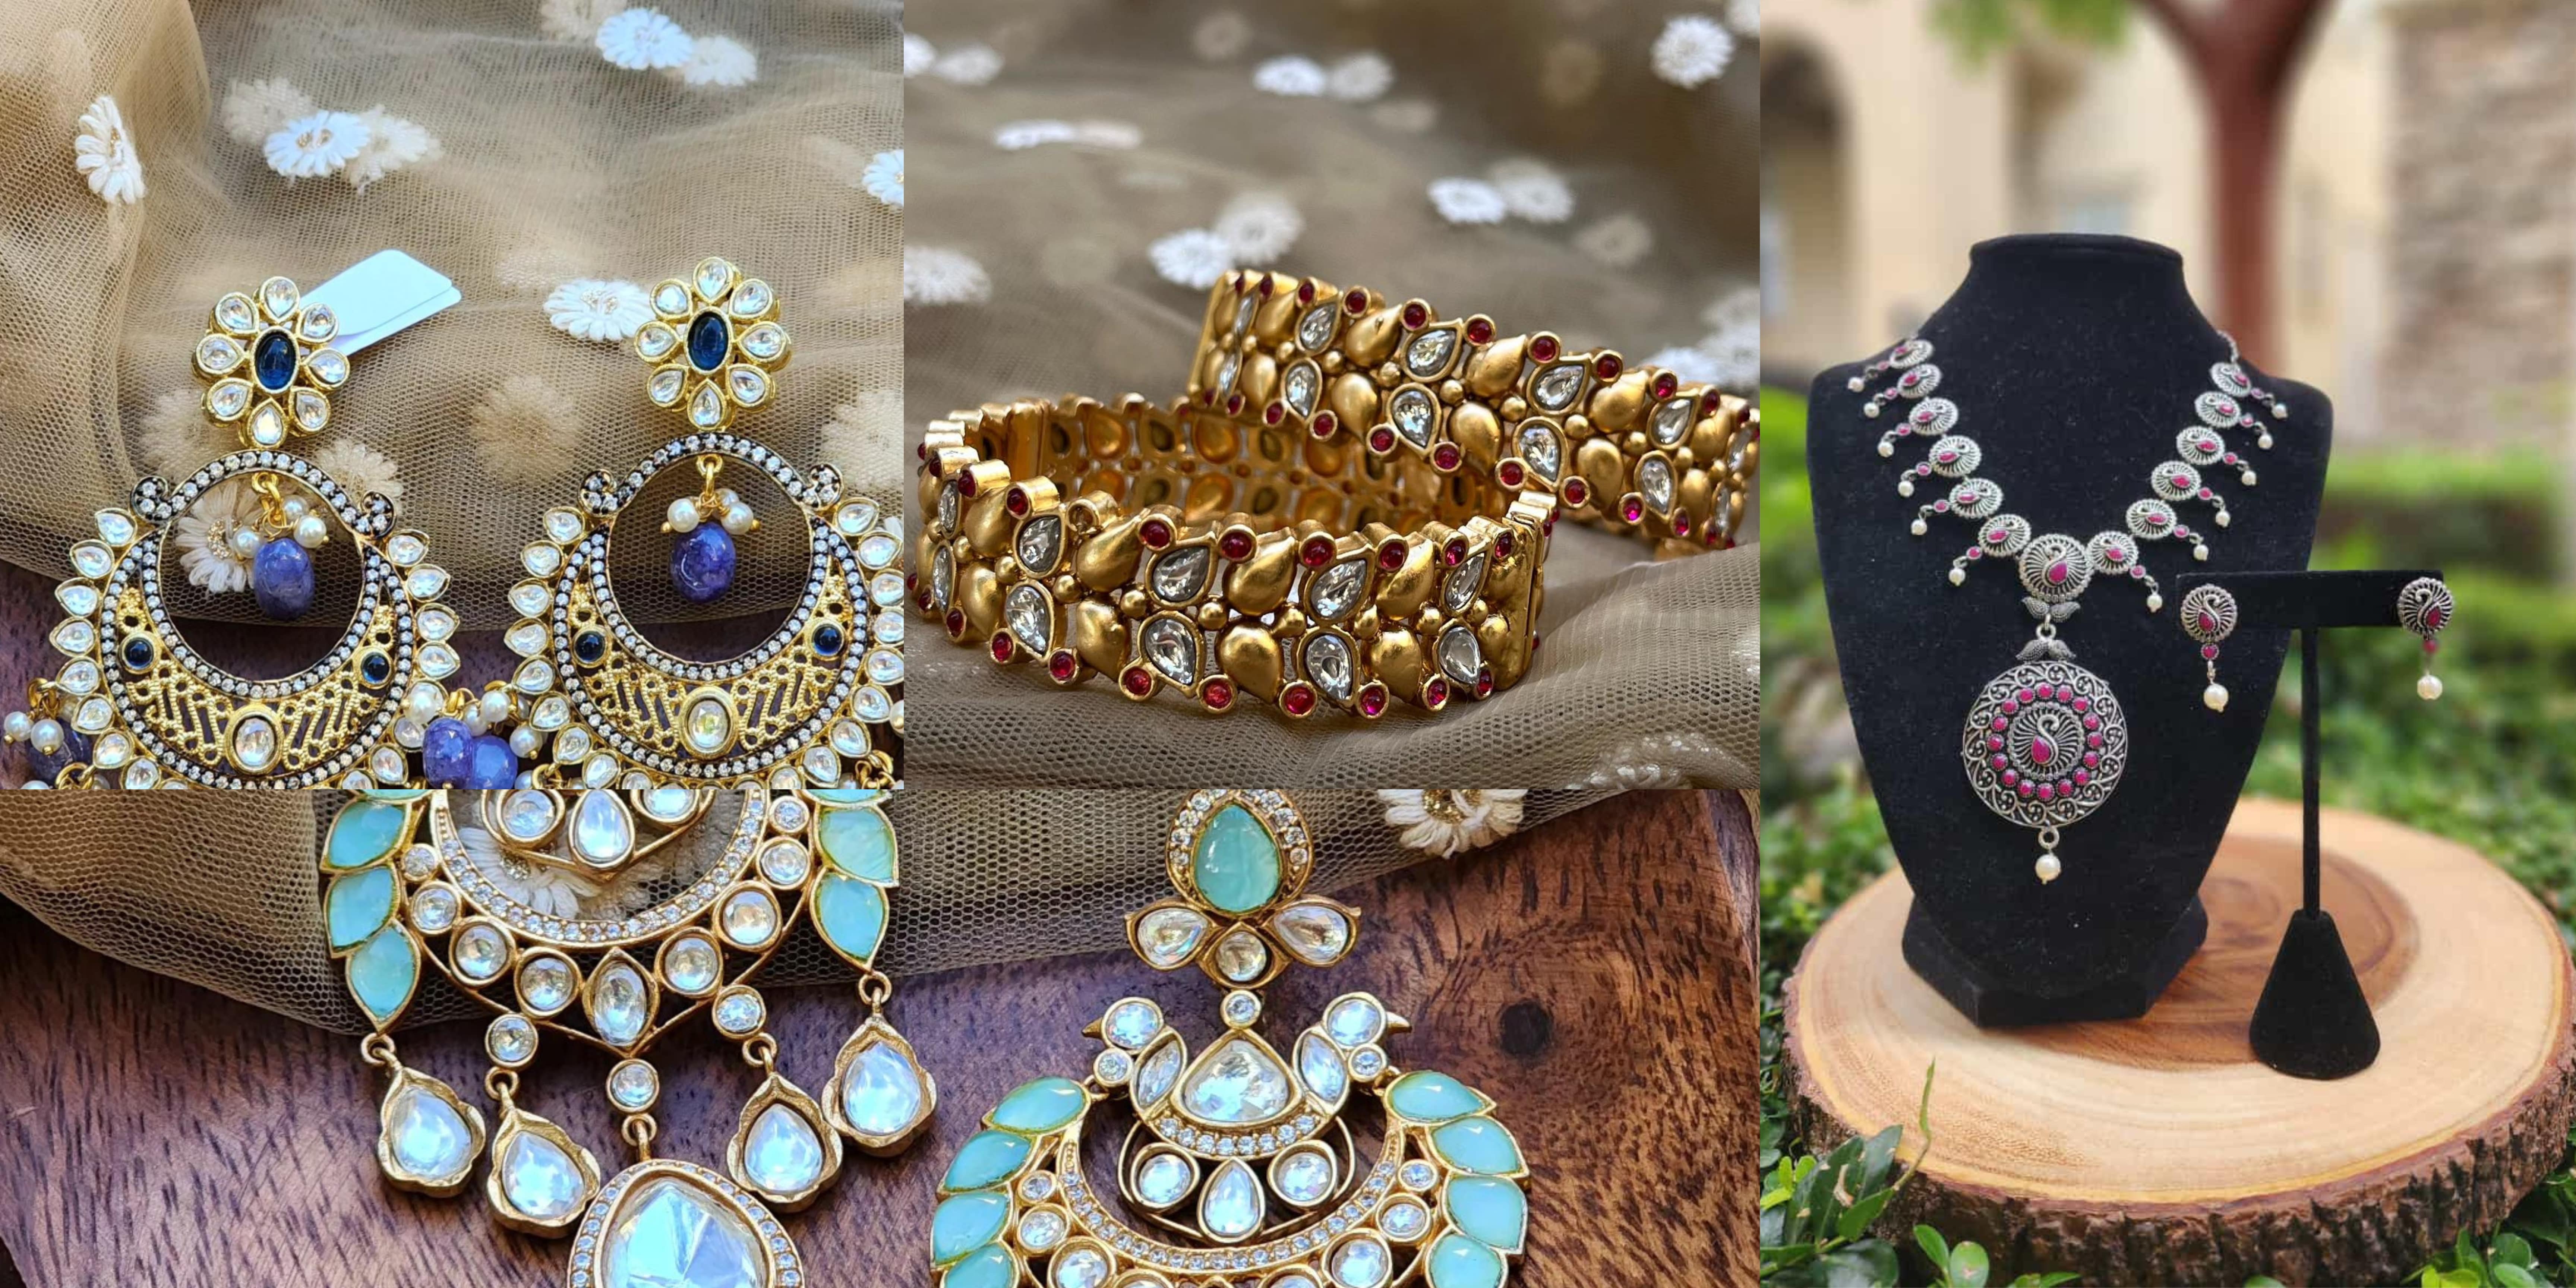 Shringhaar: Introducing a Treasure Trove of Indian Artisan Jewelry in the US and Canada